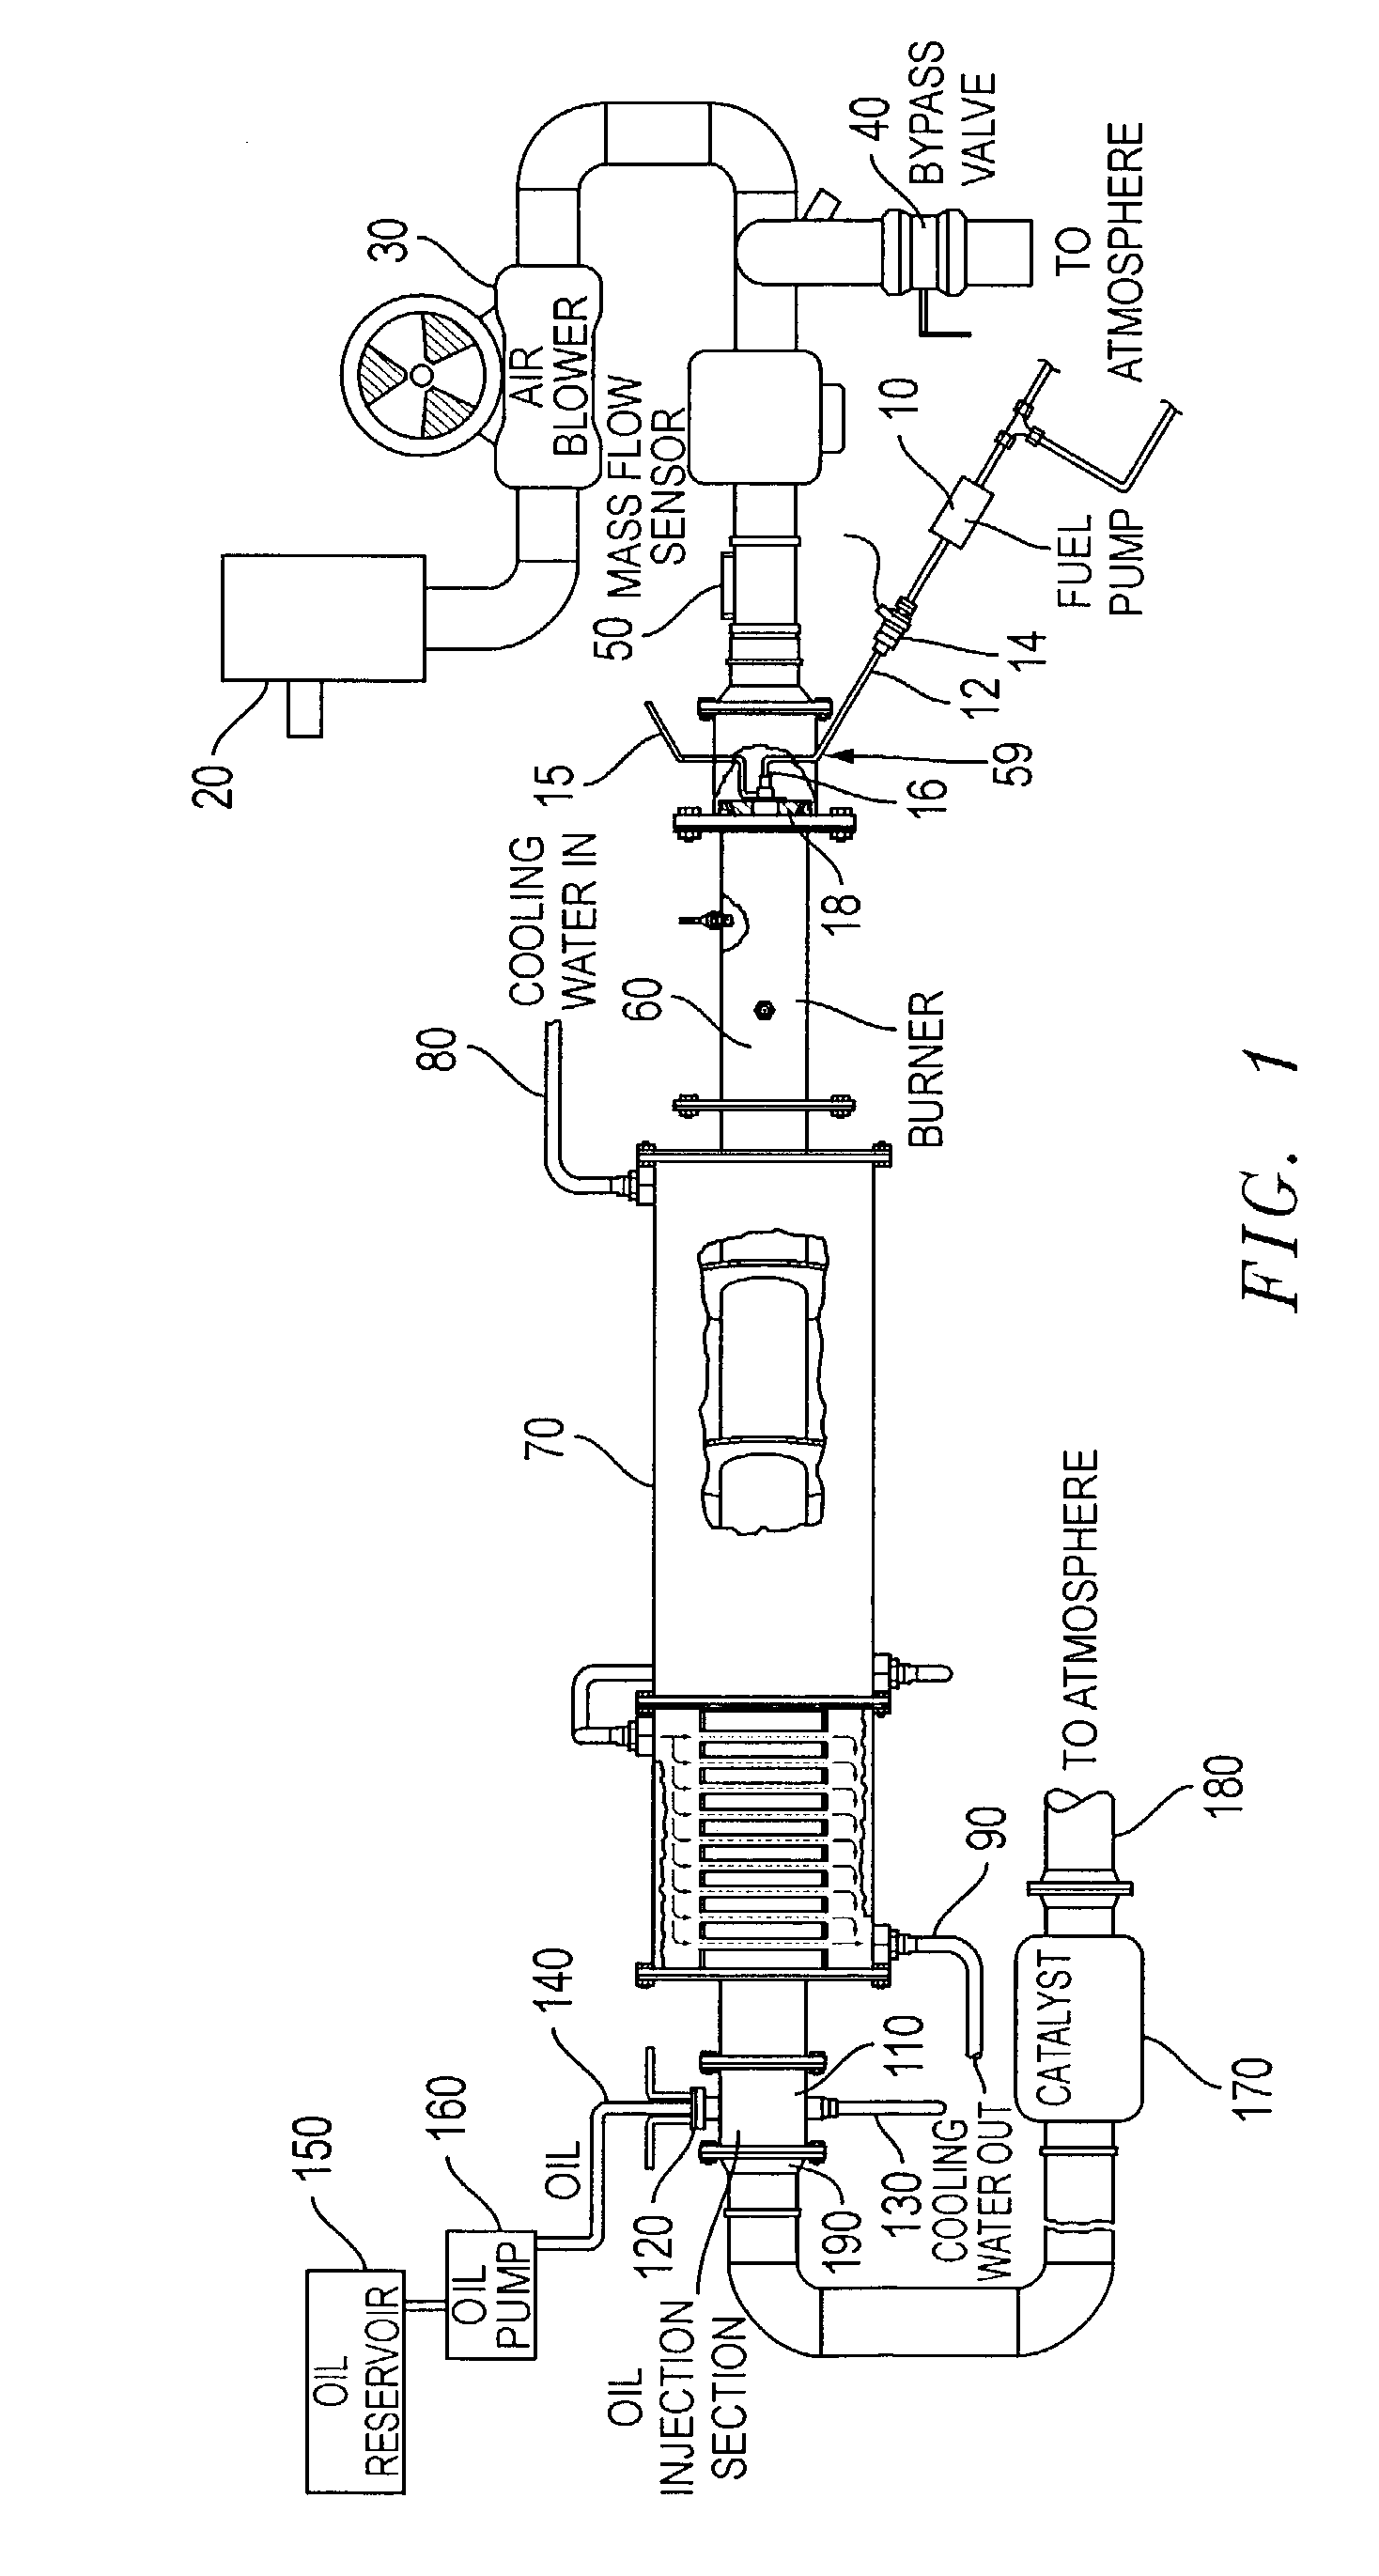 Method for accelerated aging of catalytic converters incorporating engine cold start simulation